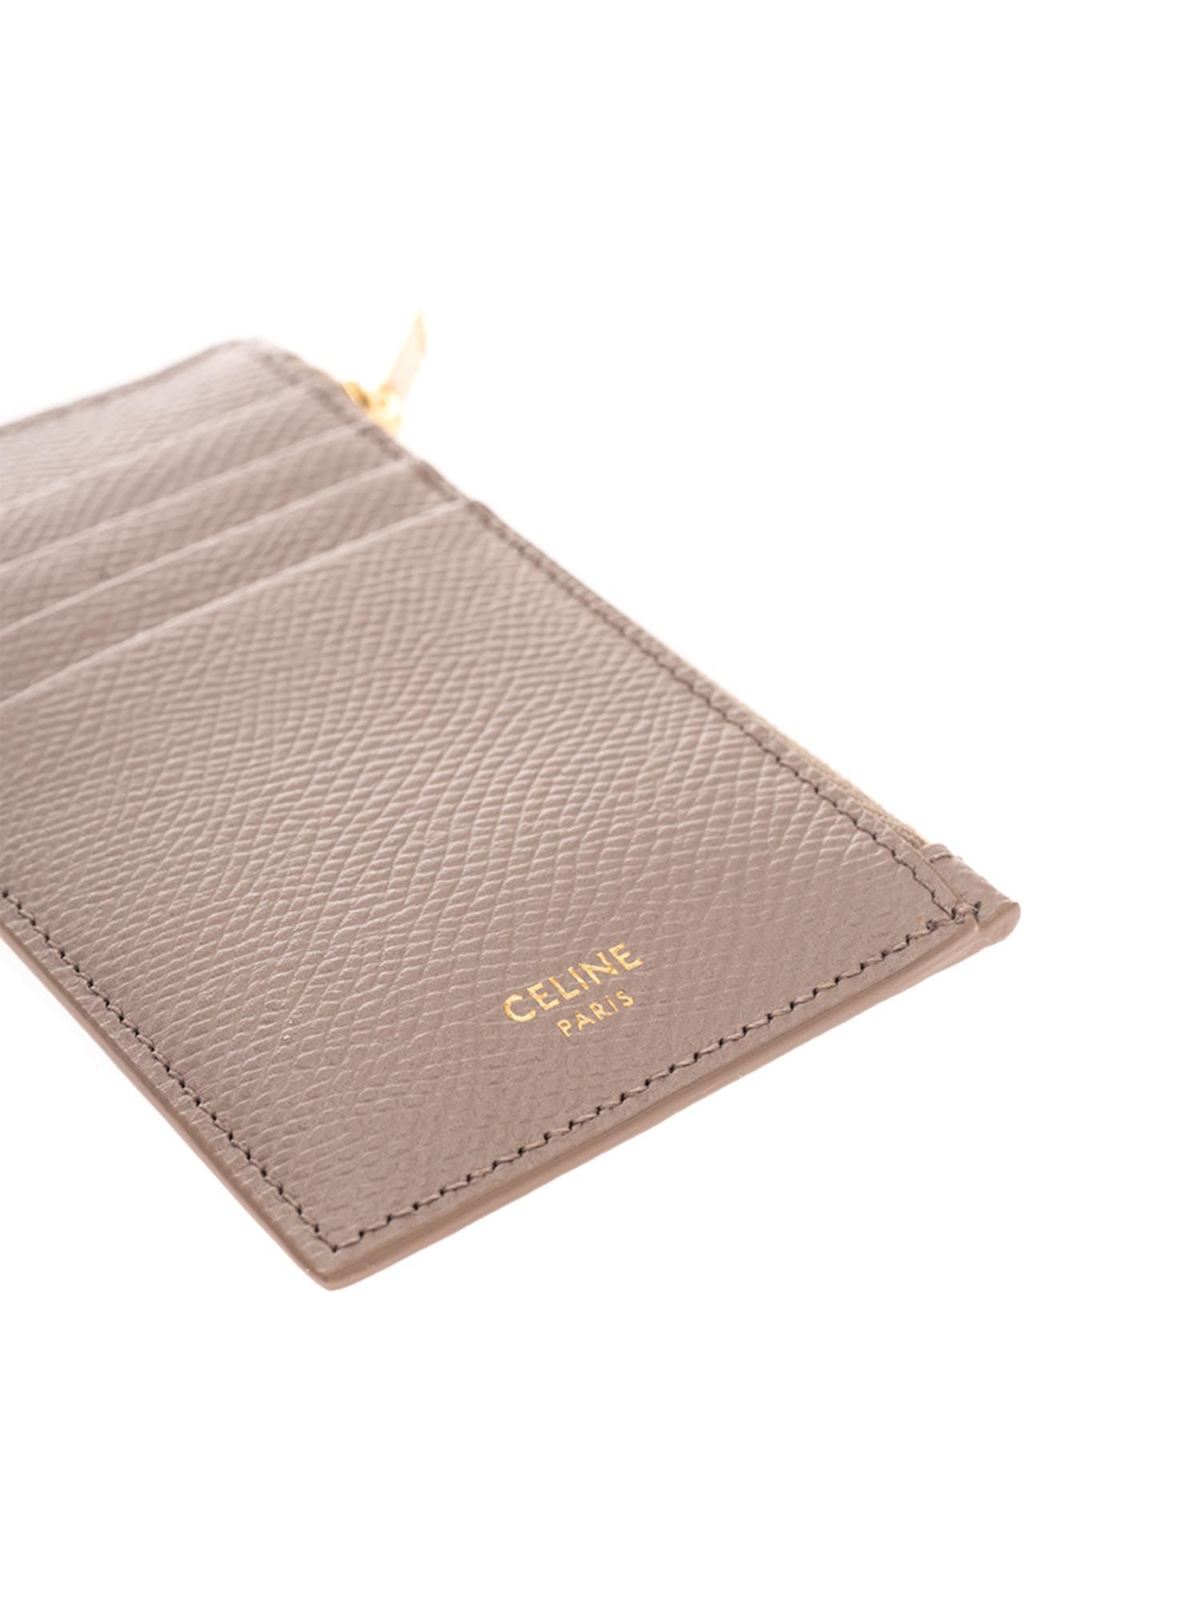 ZIPPED COMPACT CARD HOLDER ESSENTIALS IN GRAINED CALFSKIN - PEBBLE